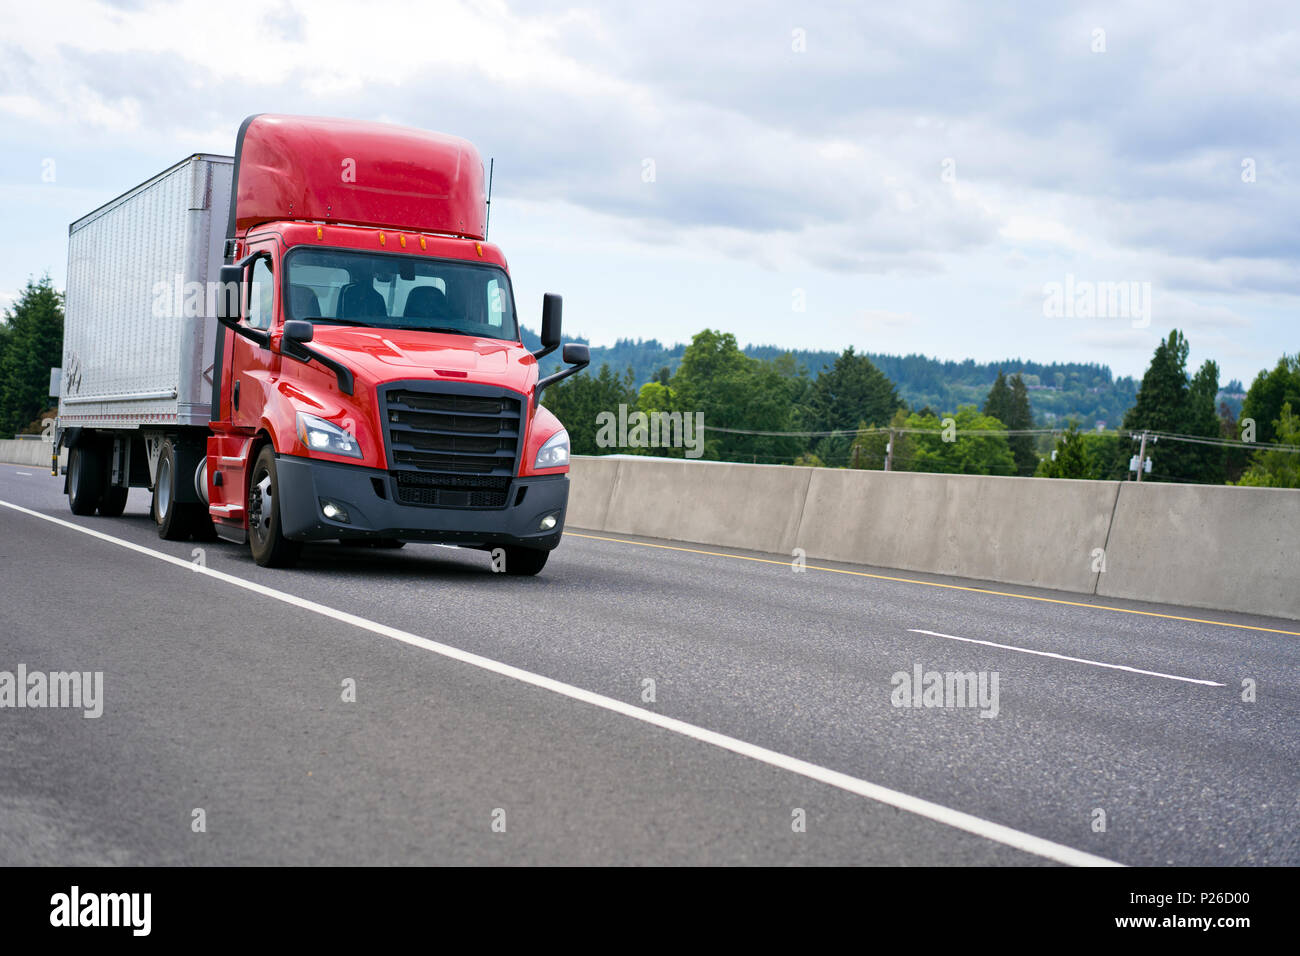 Commercial big rig red day cab local haul semi truck with roof spoiler transporting dry van semi trailer on the highway road for delivery of industria Stock Photo